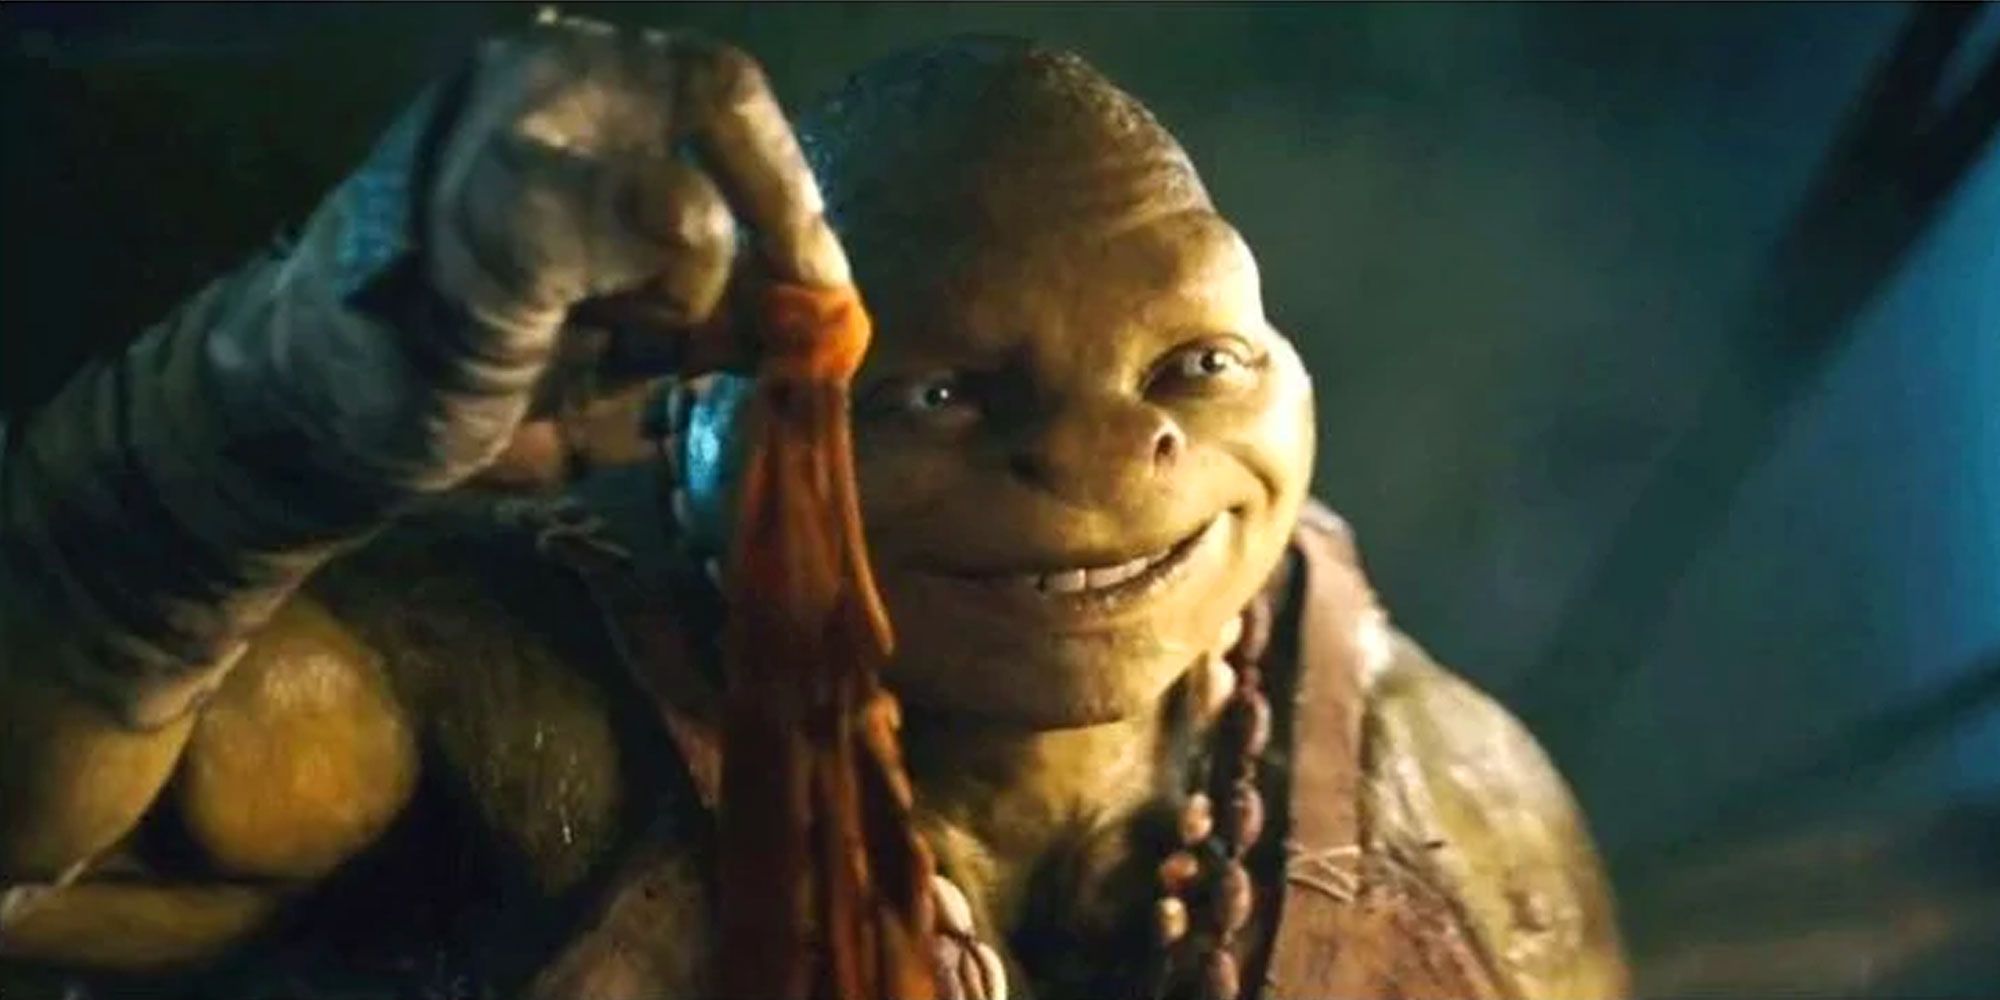 Michelangelo removes his mask in the 2016 Teenage Mutant Ninja Turtles live action movie